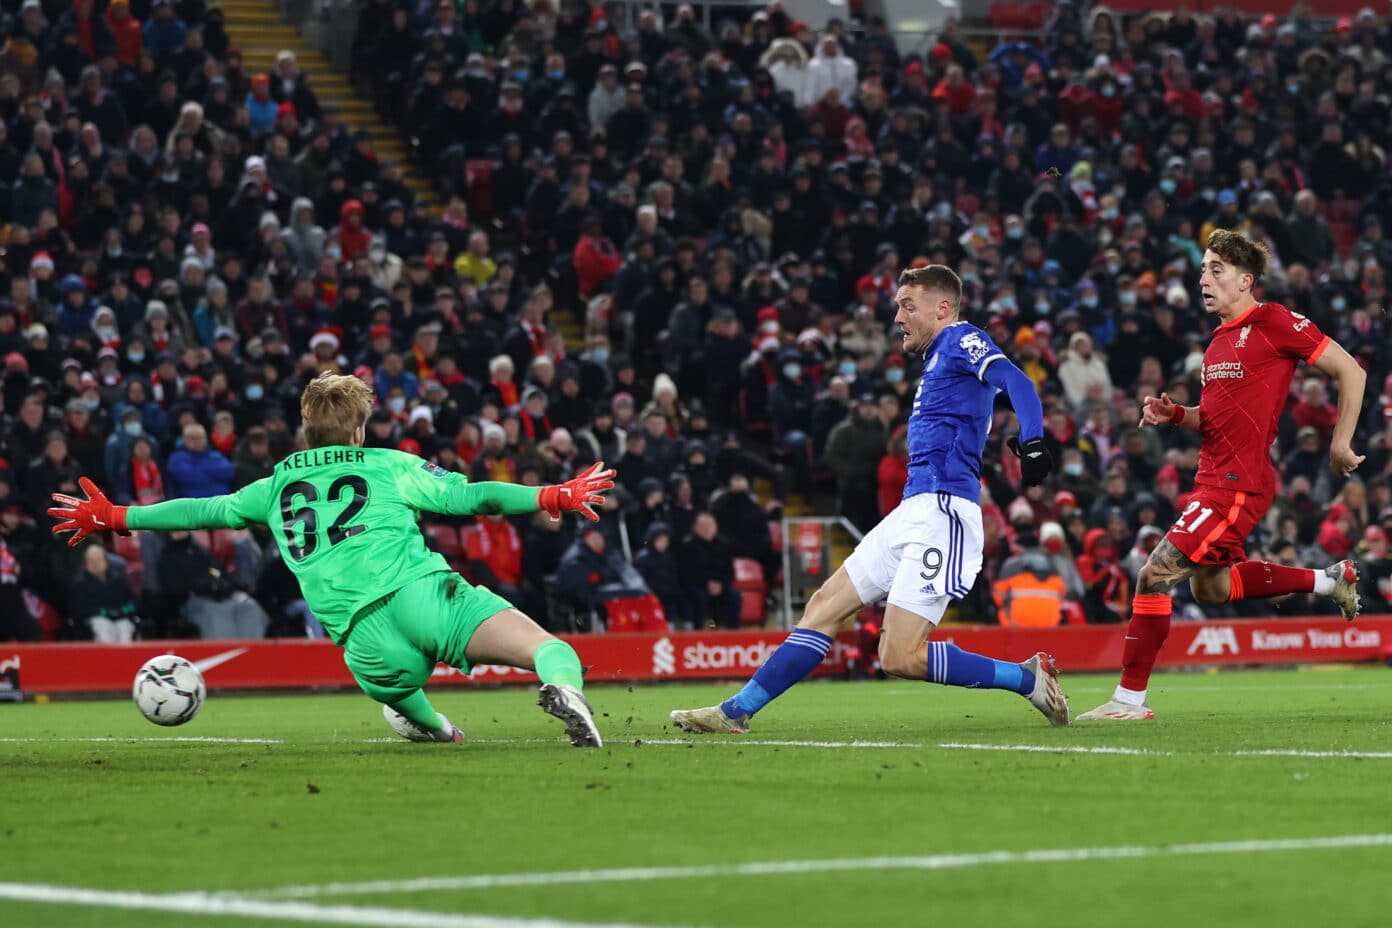 Liverpool 33 Leicester (54 pens) Reds reach Carabao Cup semifinals